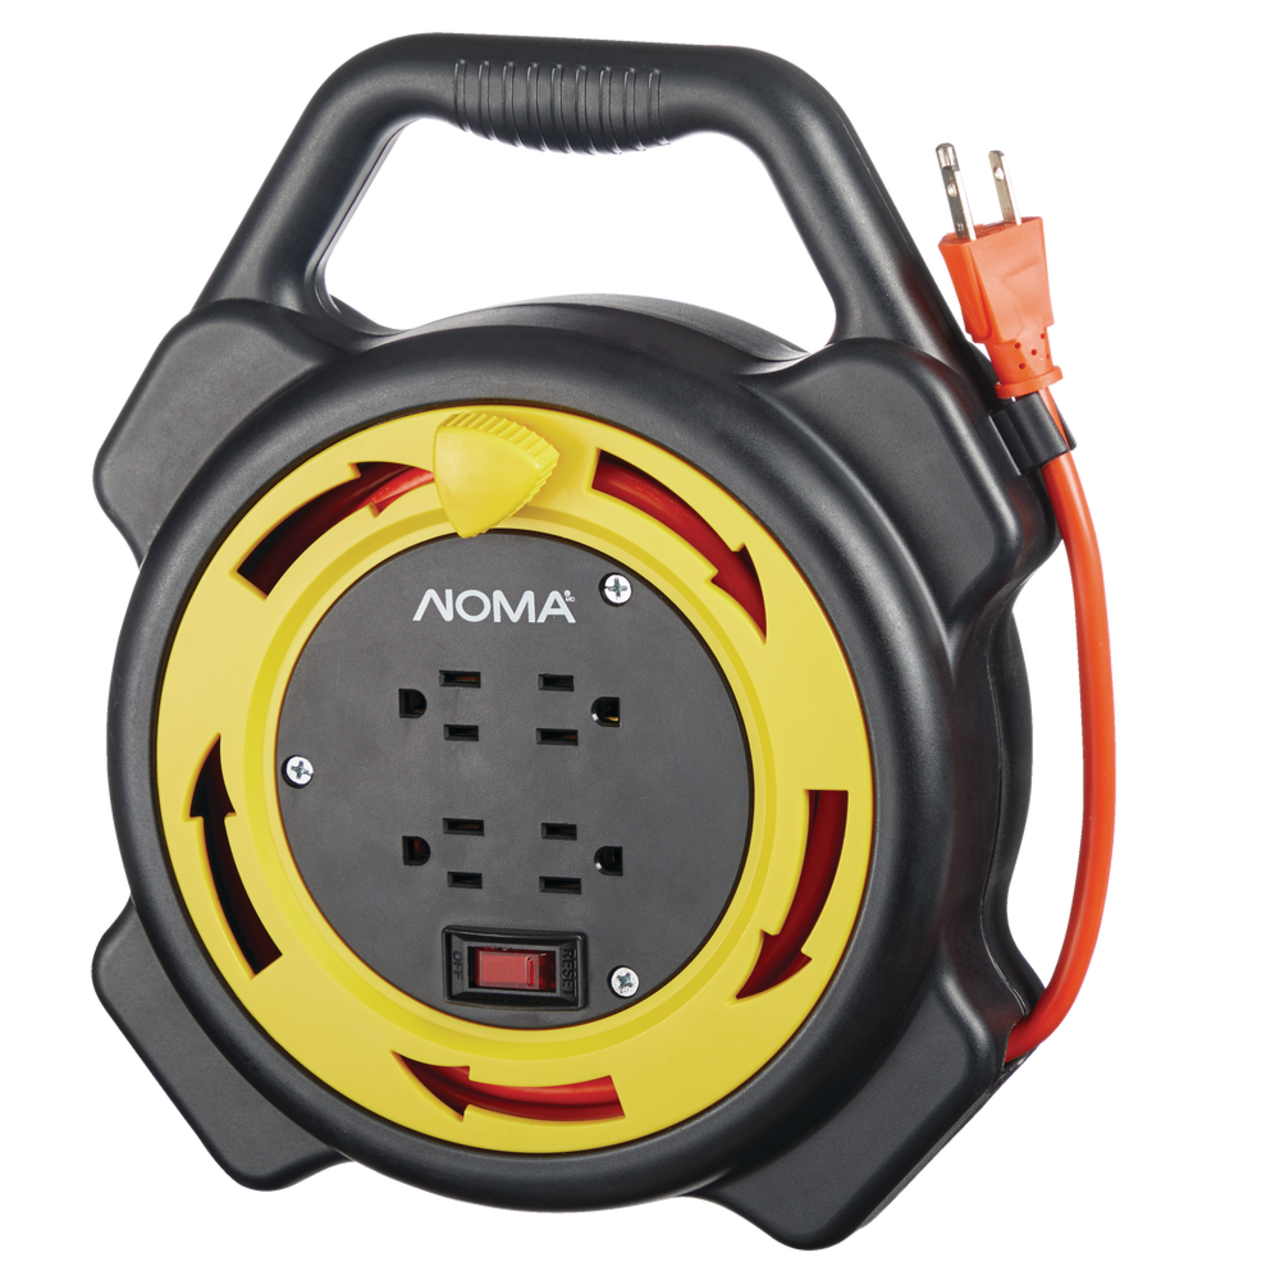 https://media-www.canadiantire.ca/product/fixing/electrical/power-bars-extension-cords-timers/0522495/noma-4-outlet-cord-caddy-with-25-7-6-m-cord-0d09df71-db8a-4436-b81c-52b3dbbb657b.png?imdensity=1&imwidth=640&impolicy=mZoom